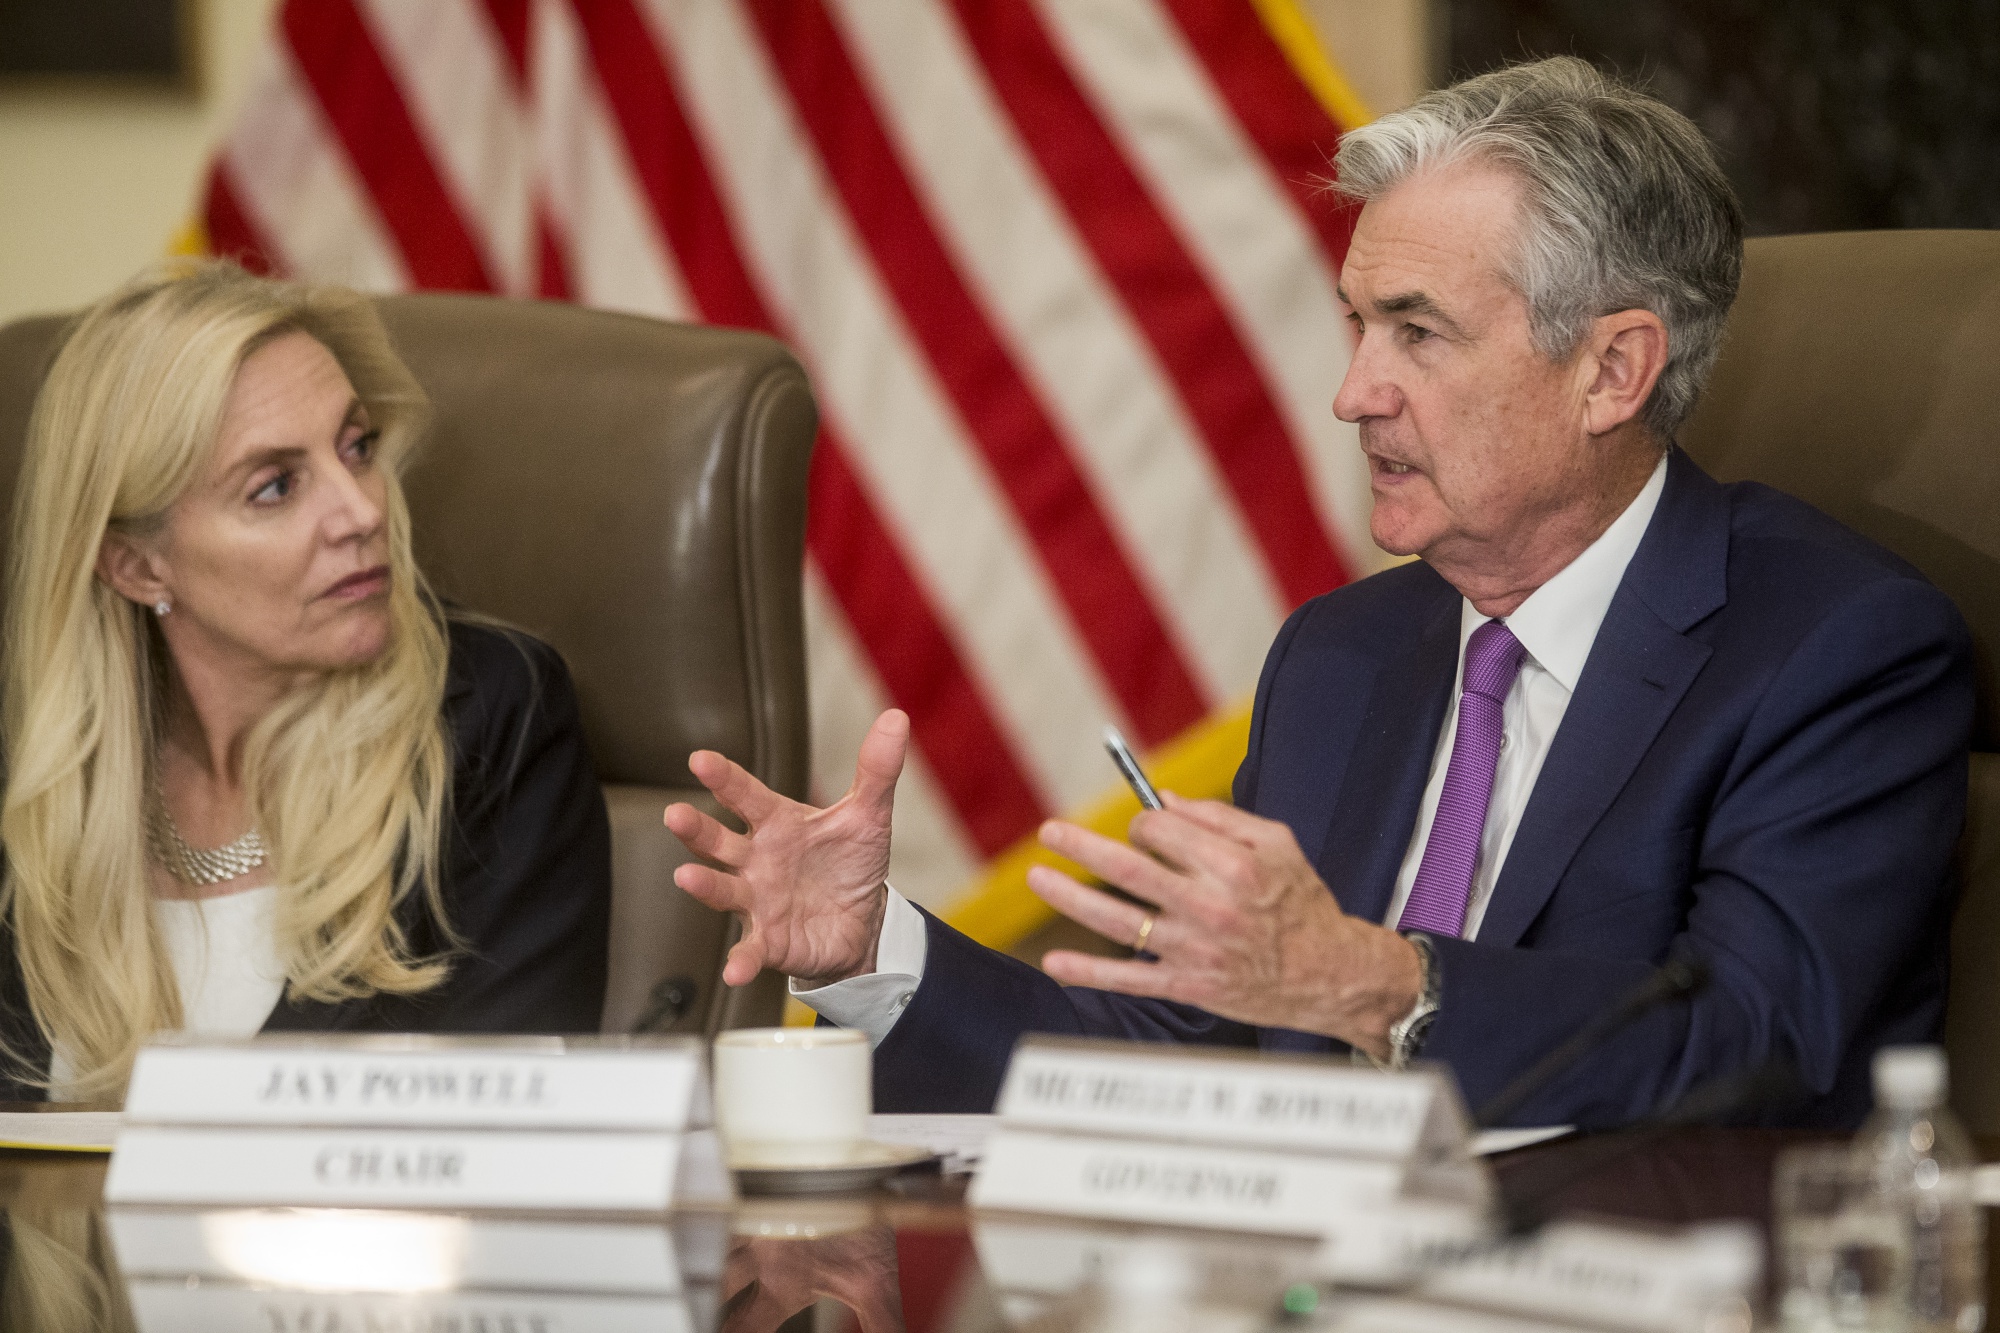 Lael Brainard listens as Jerome Powell speaks during an event in&nbsp;2019.